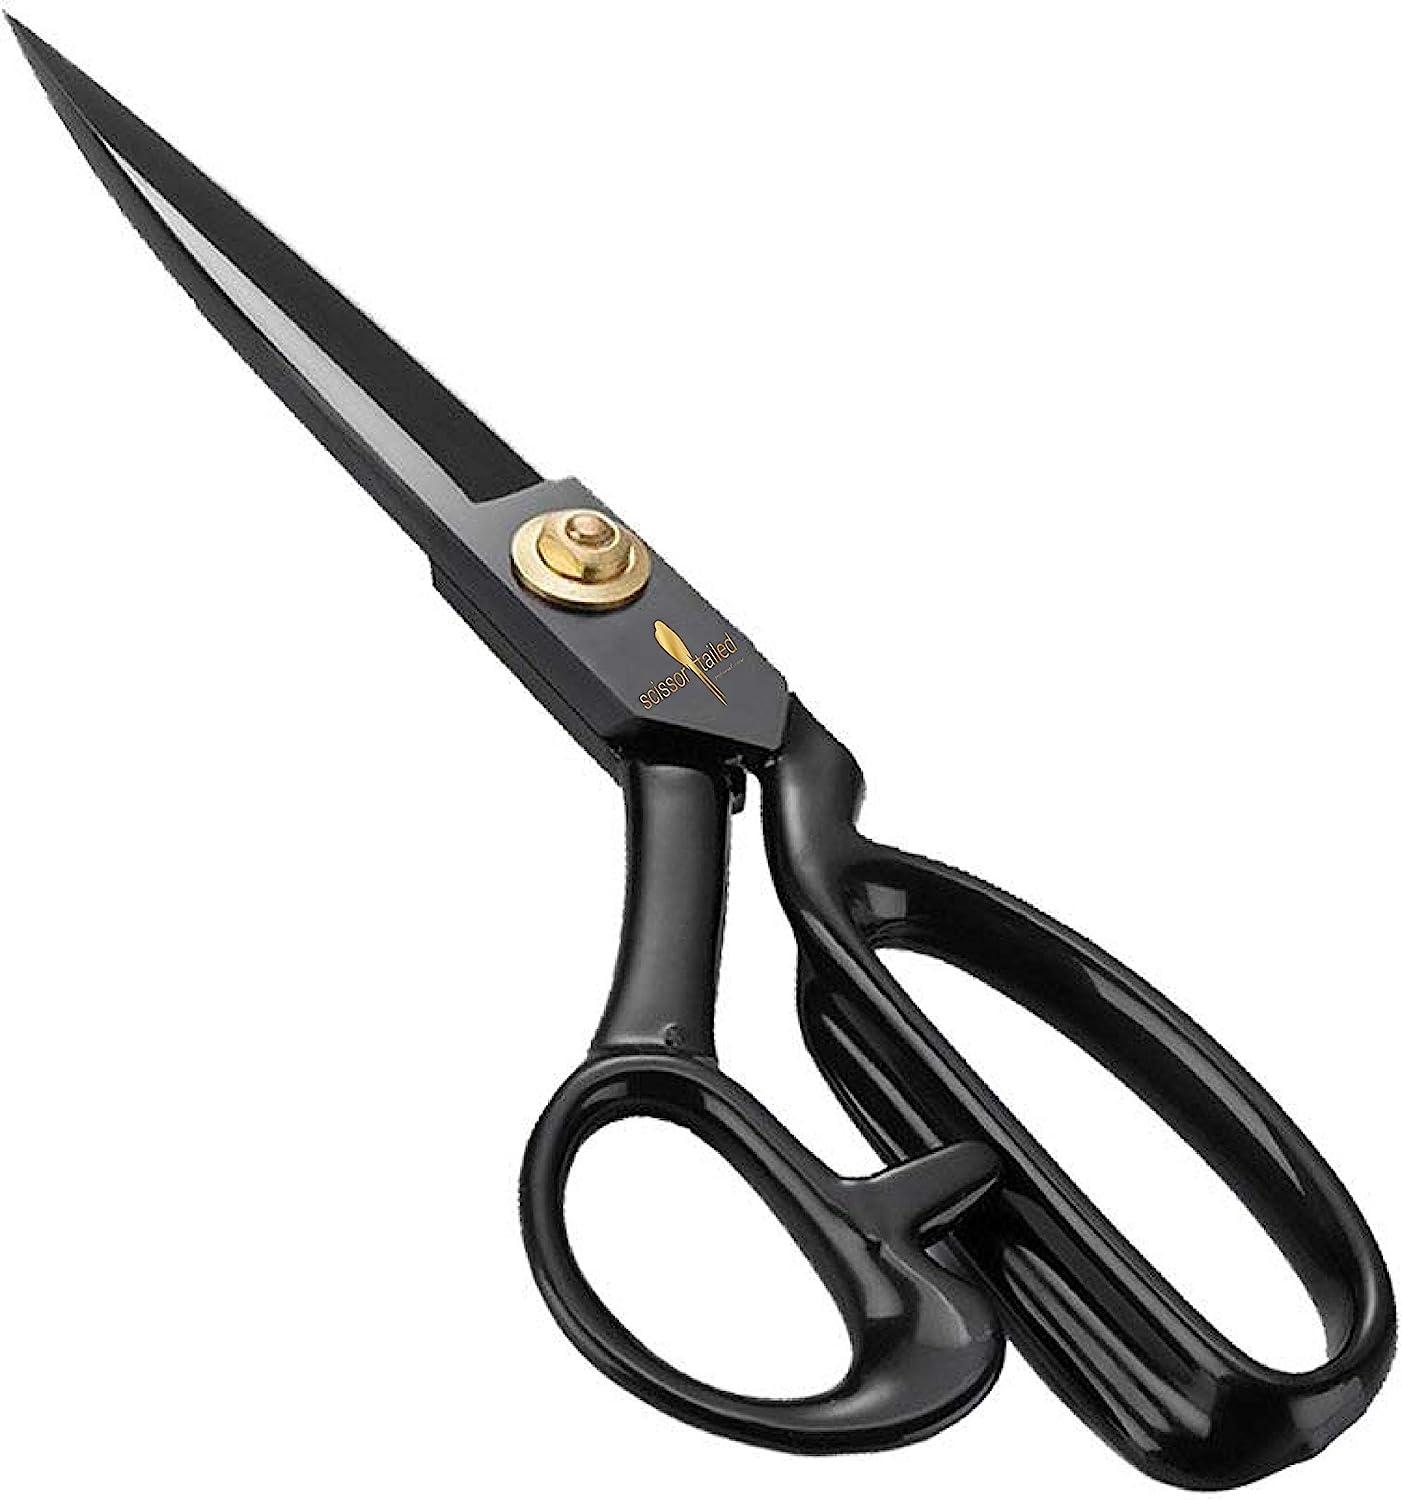 Professional Tailor Scissors 8 Inch for Cutting Fabric Heavy Duty